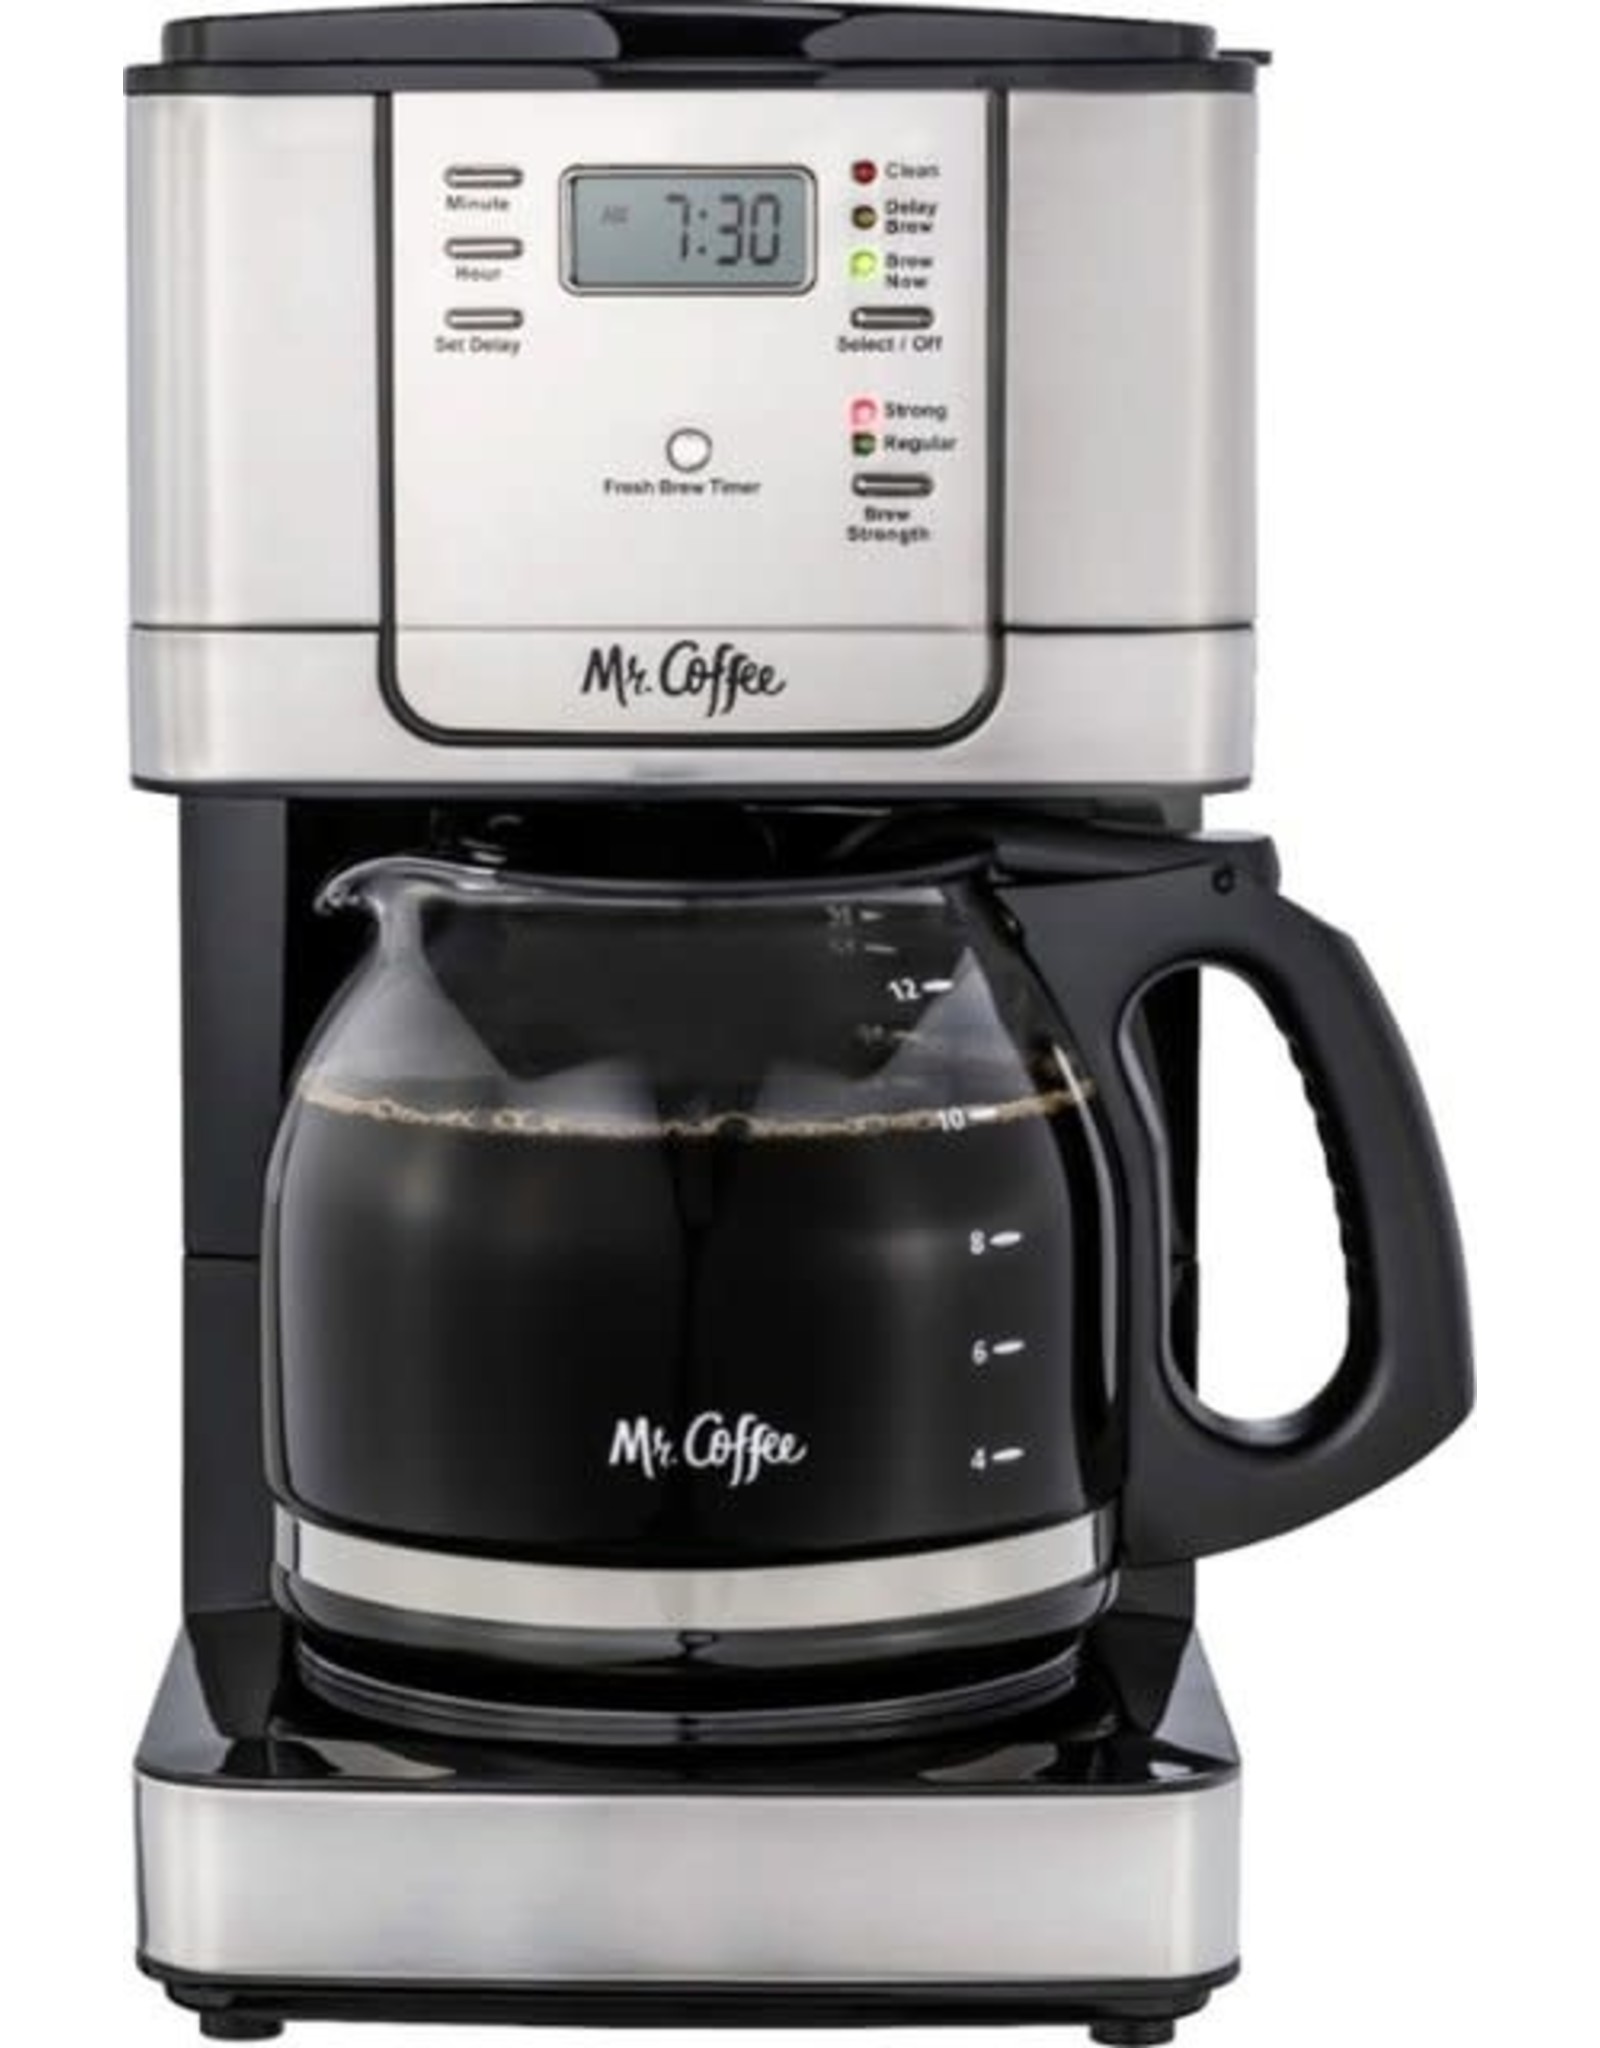 mr. coffee 2131084 Mr. Coffee - 12-Cup Coffee Maker with Strong Brew Selector - Stainless Steel